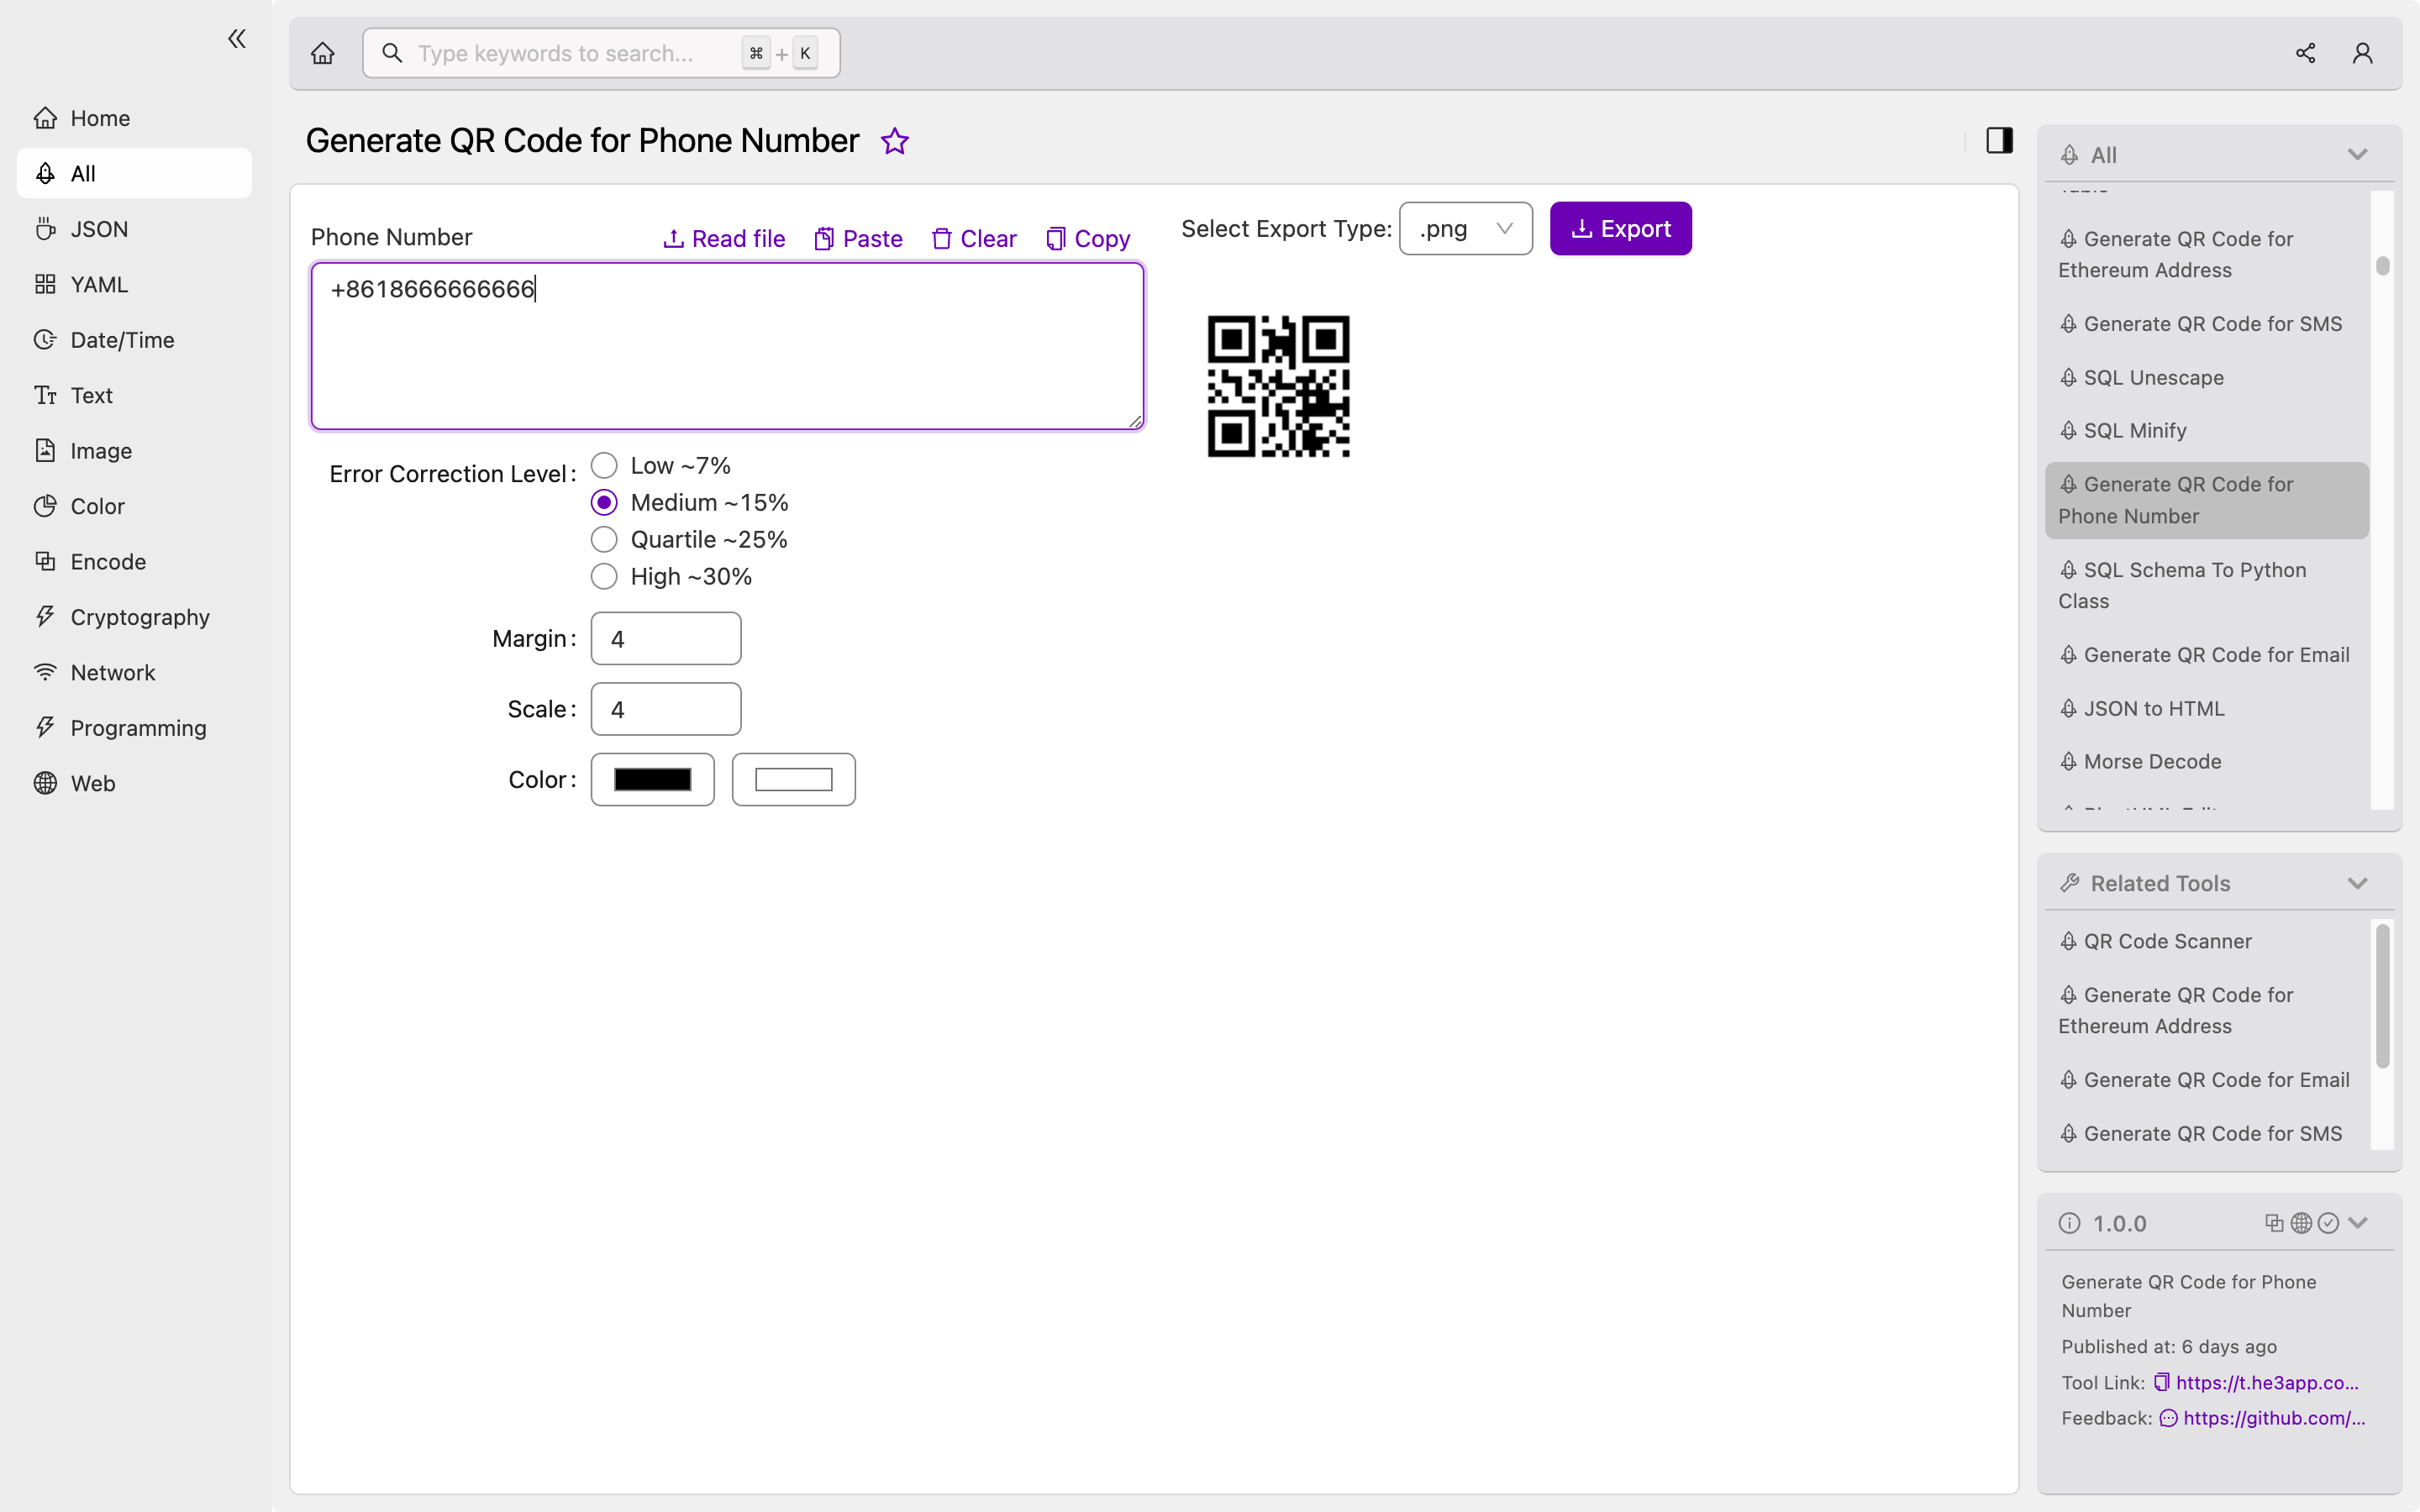 Generate QR Code for Phone Number